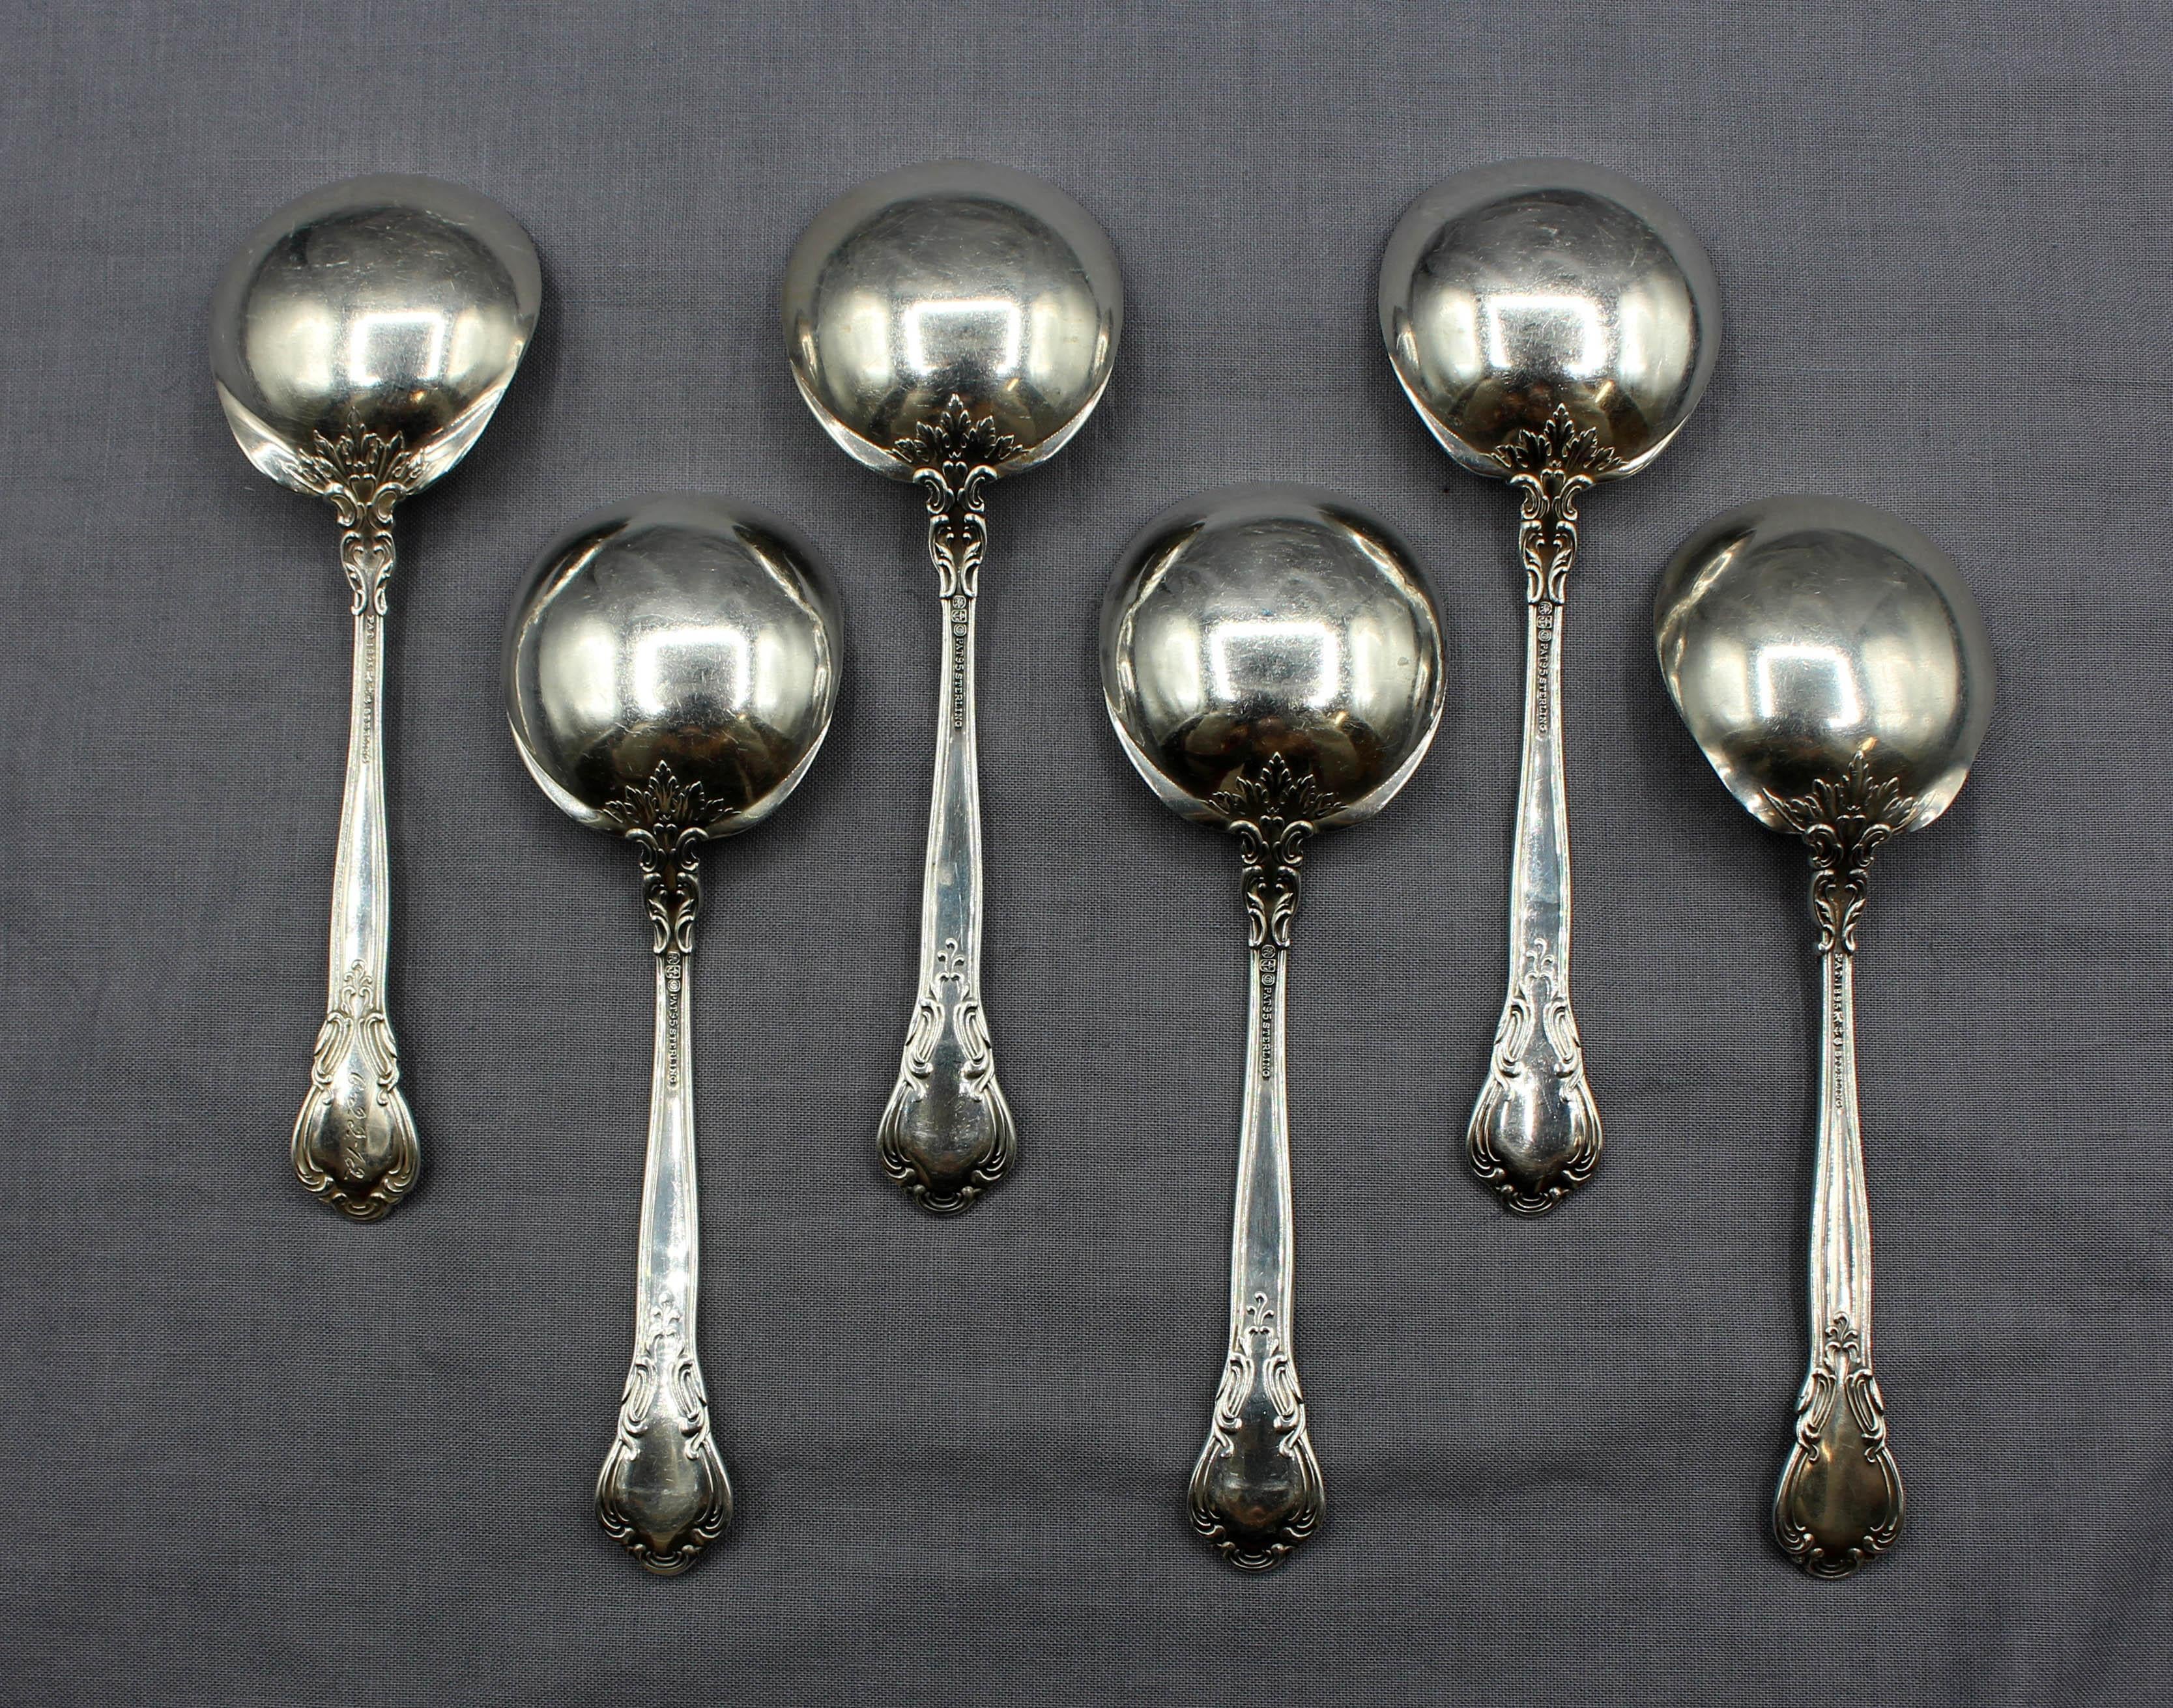 Assembled set of 6 Chantilly sterling silver boullion spoons by Gorham. One dated 1912. Four with Art Deco monograms. One never engraved. 4.35 troy oz.
5